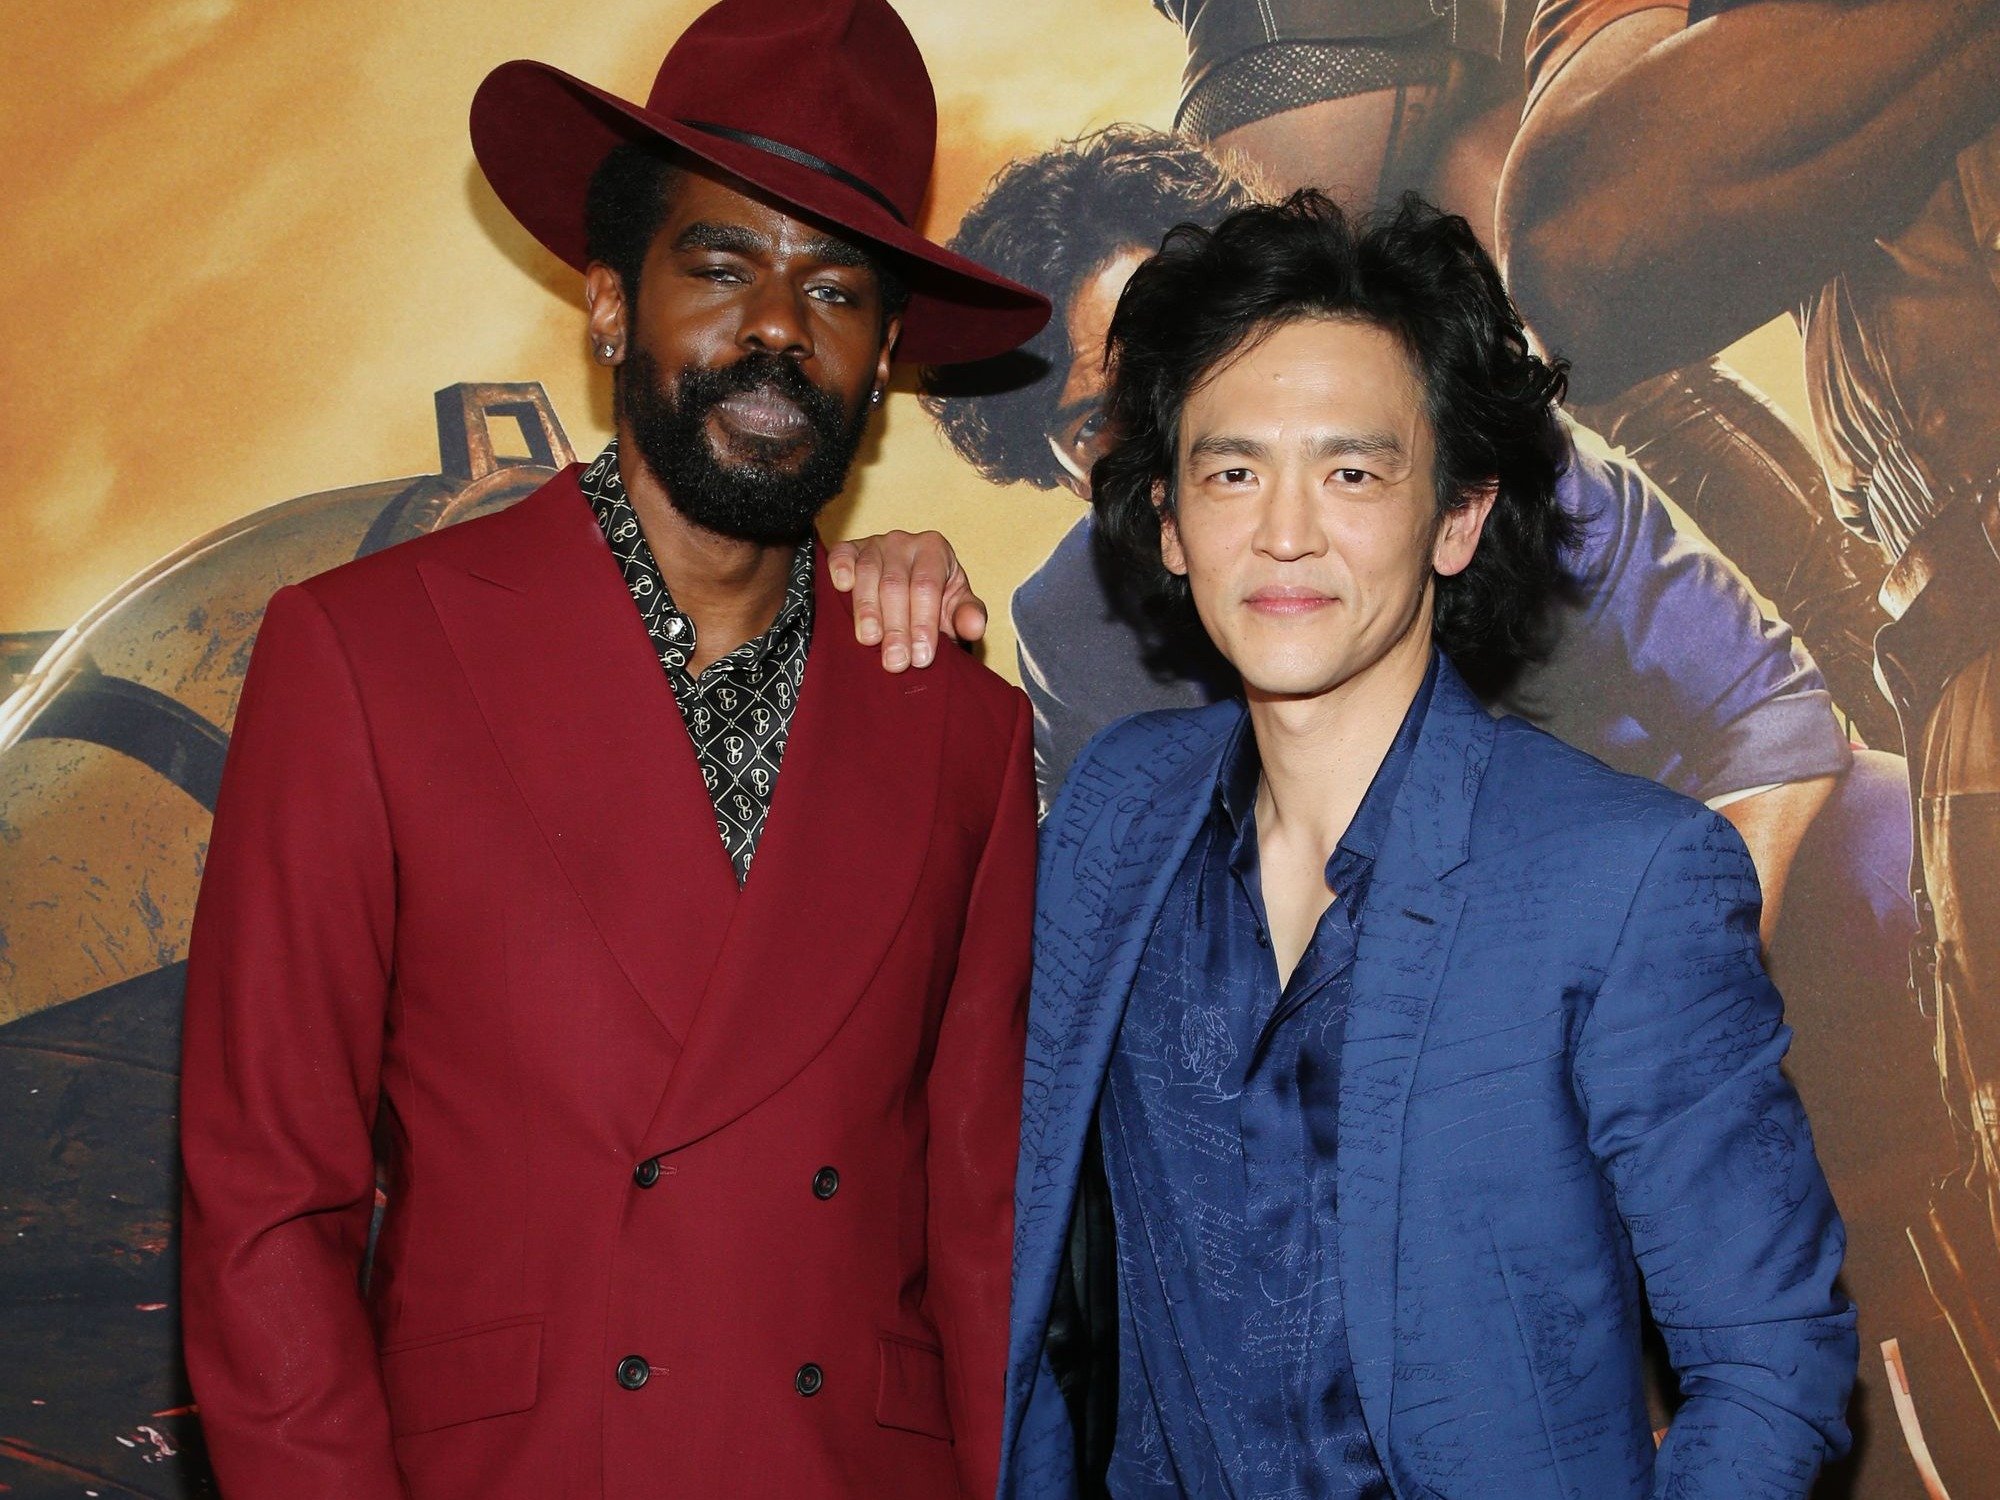 Mustafa Shakir and John Cho, who play Jet Black and Spike Spiegel in Netflix's live-action 'Cowboy Bebop.' They're standing next to one another and wearing suits.